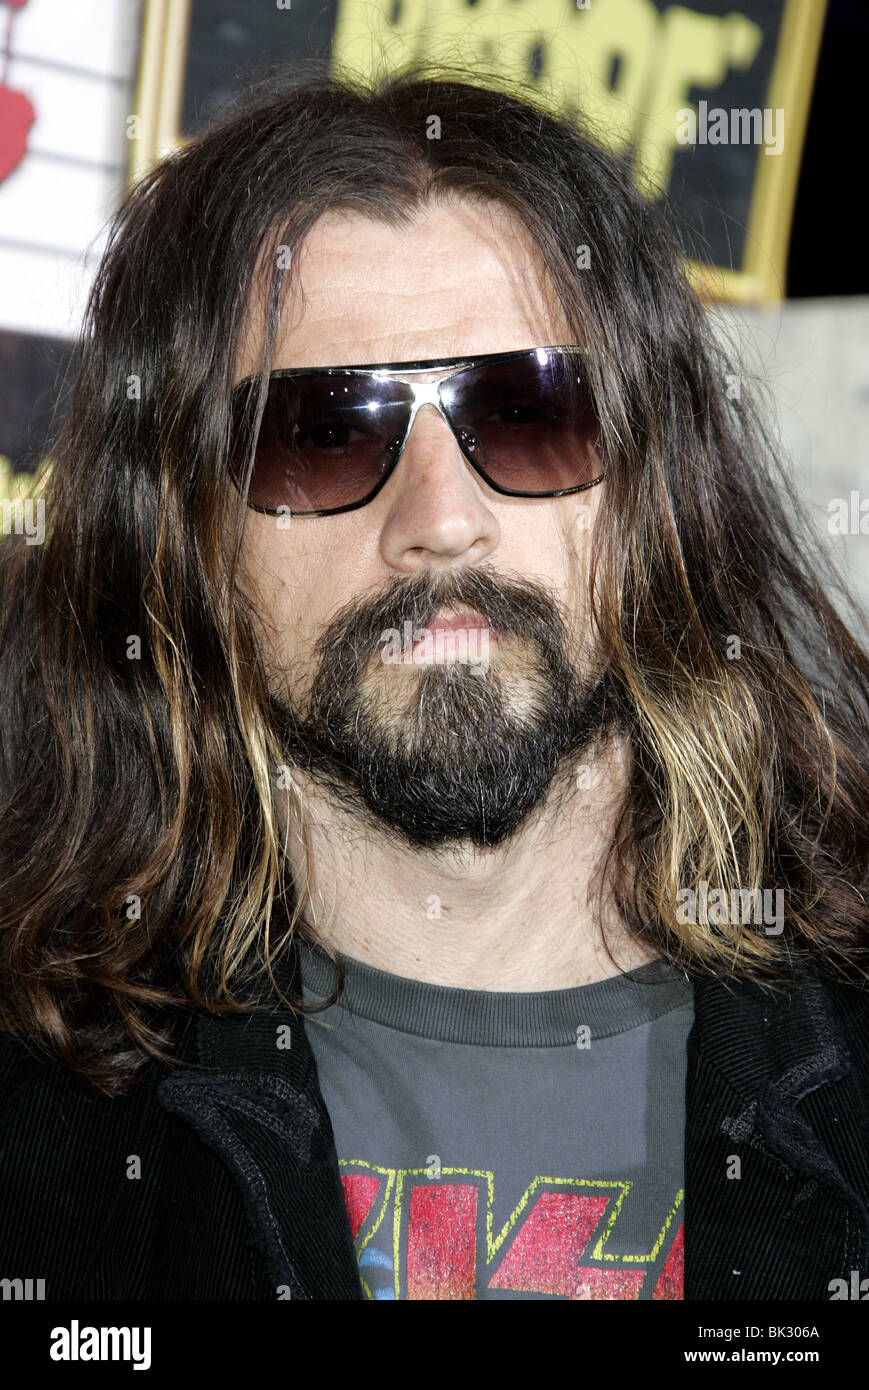 ROB ZOMBIE GRINDHOUSE FILM PREMIERE DOWNTOWN LOS ANGELES USA 26 March 2007 Stock Photo